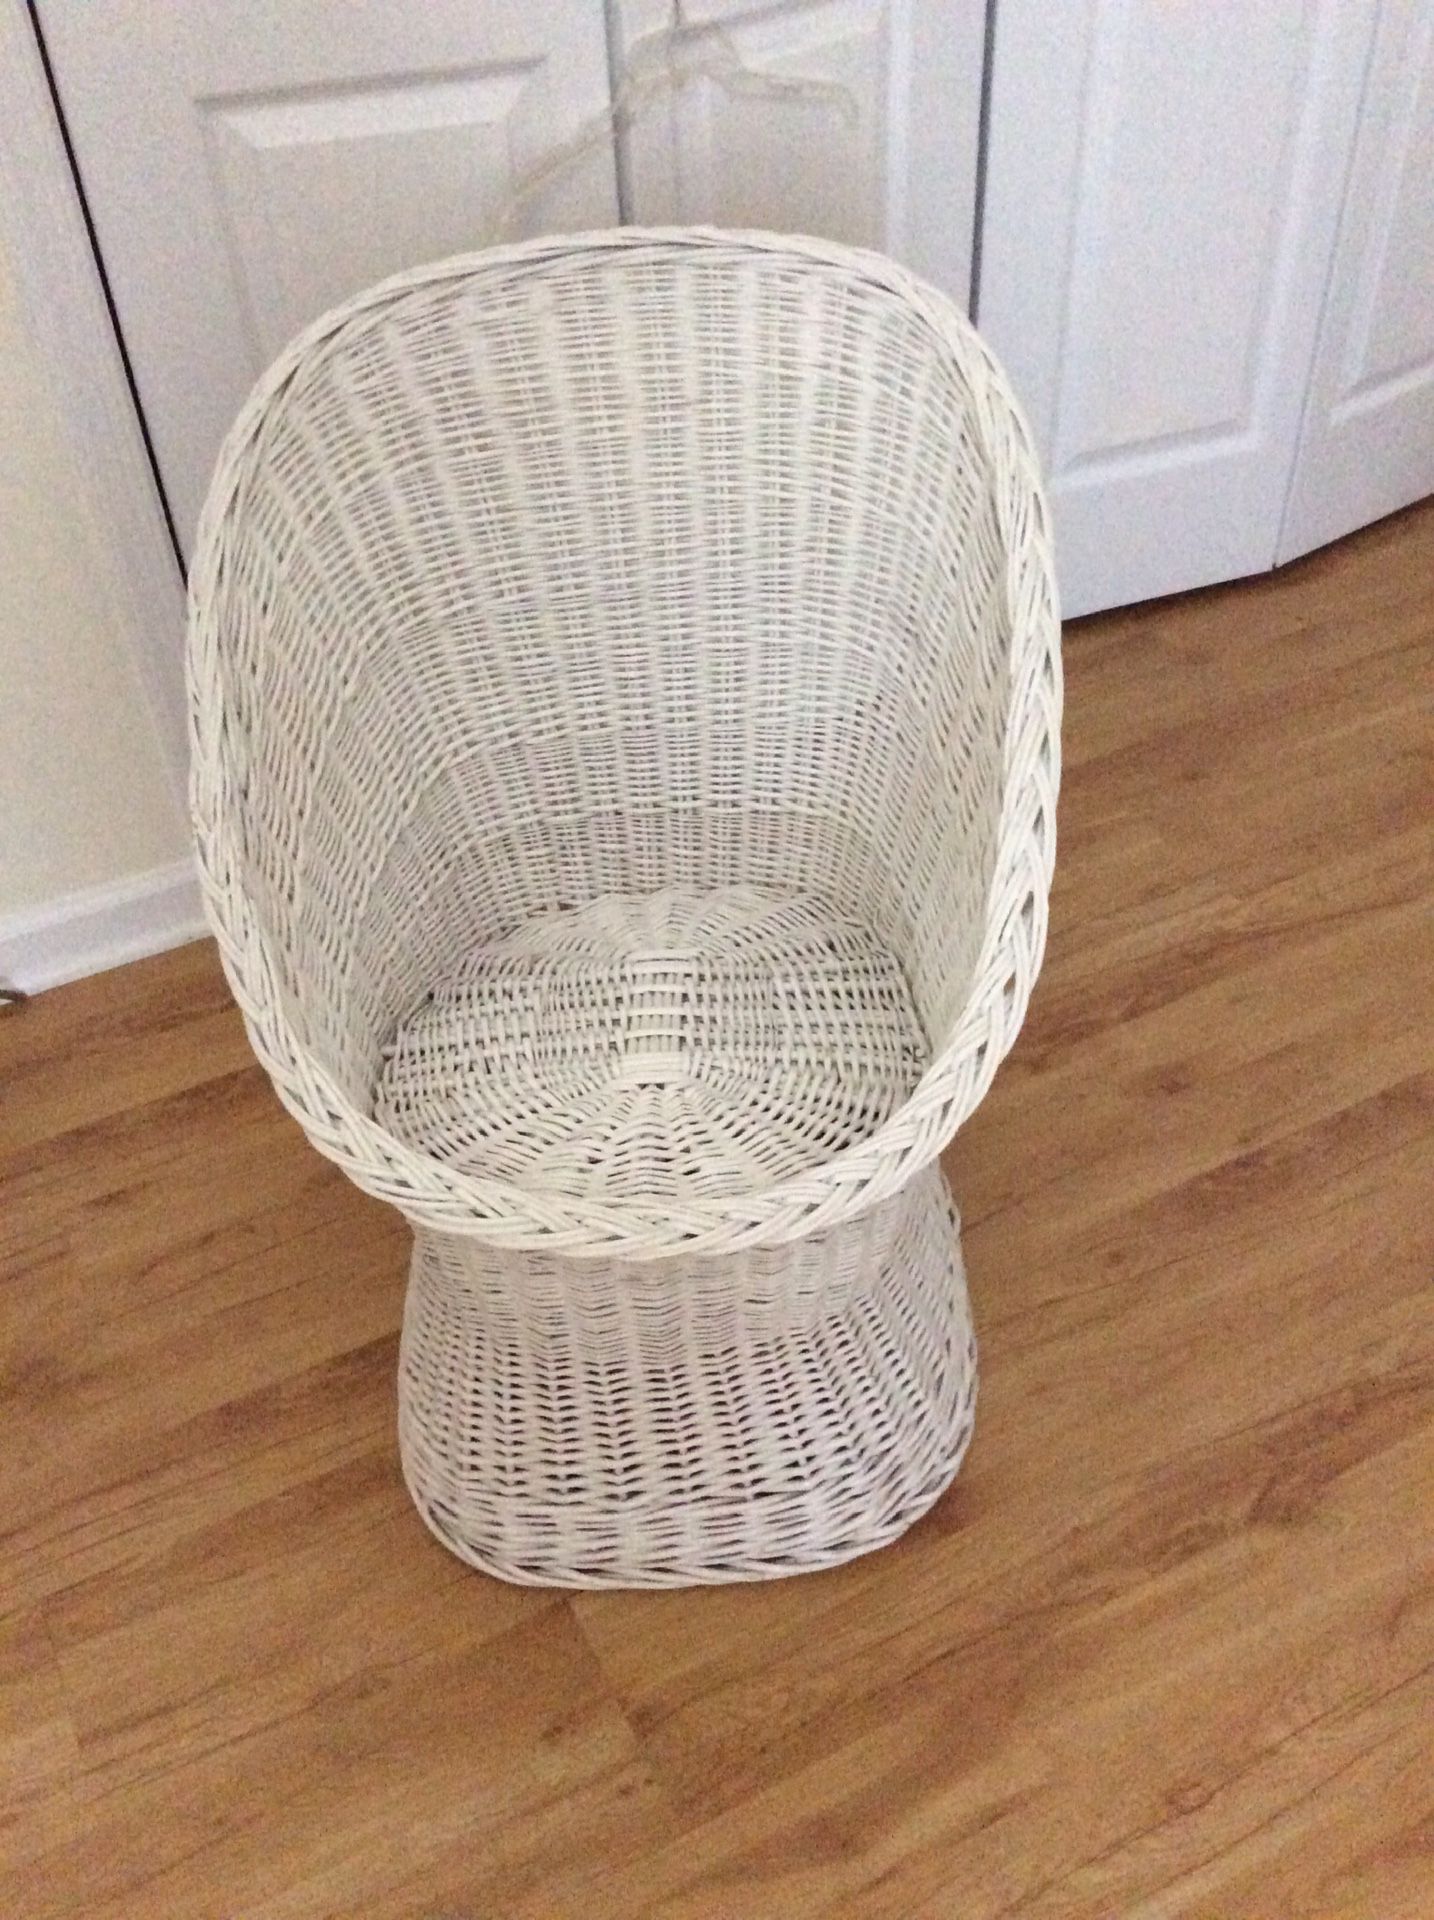 Vintage wicker chair in great condition